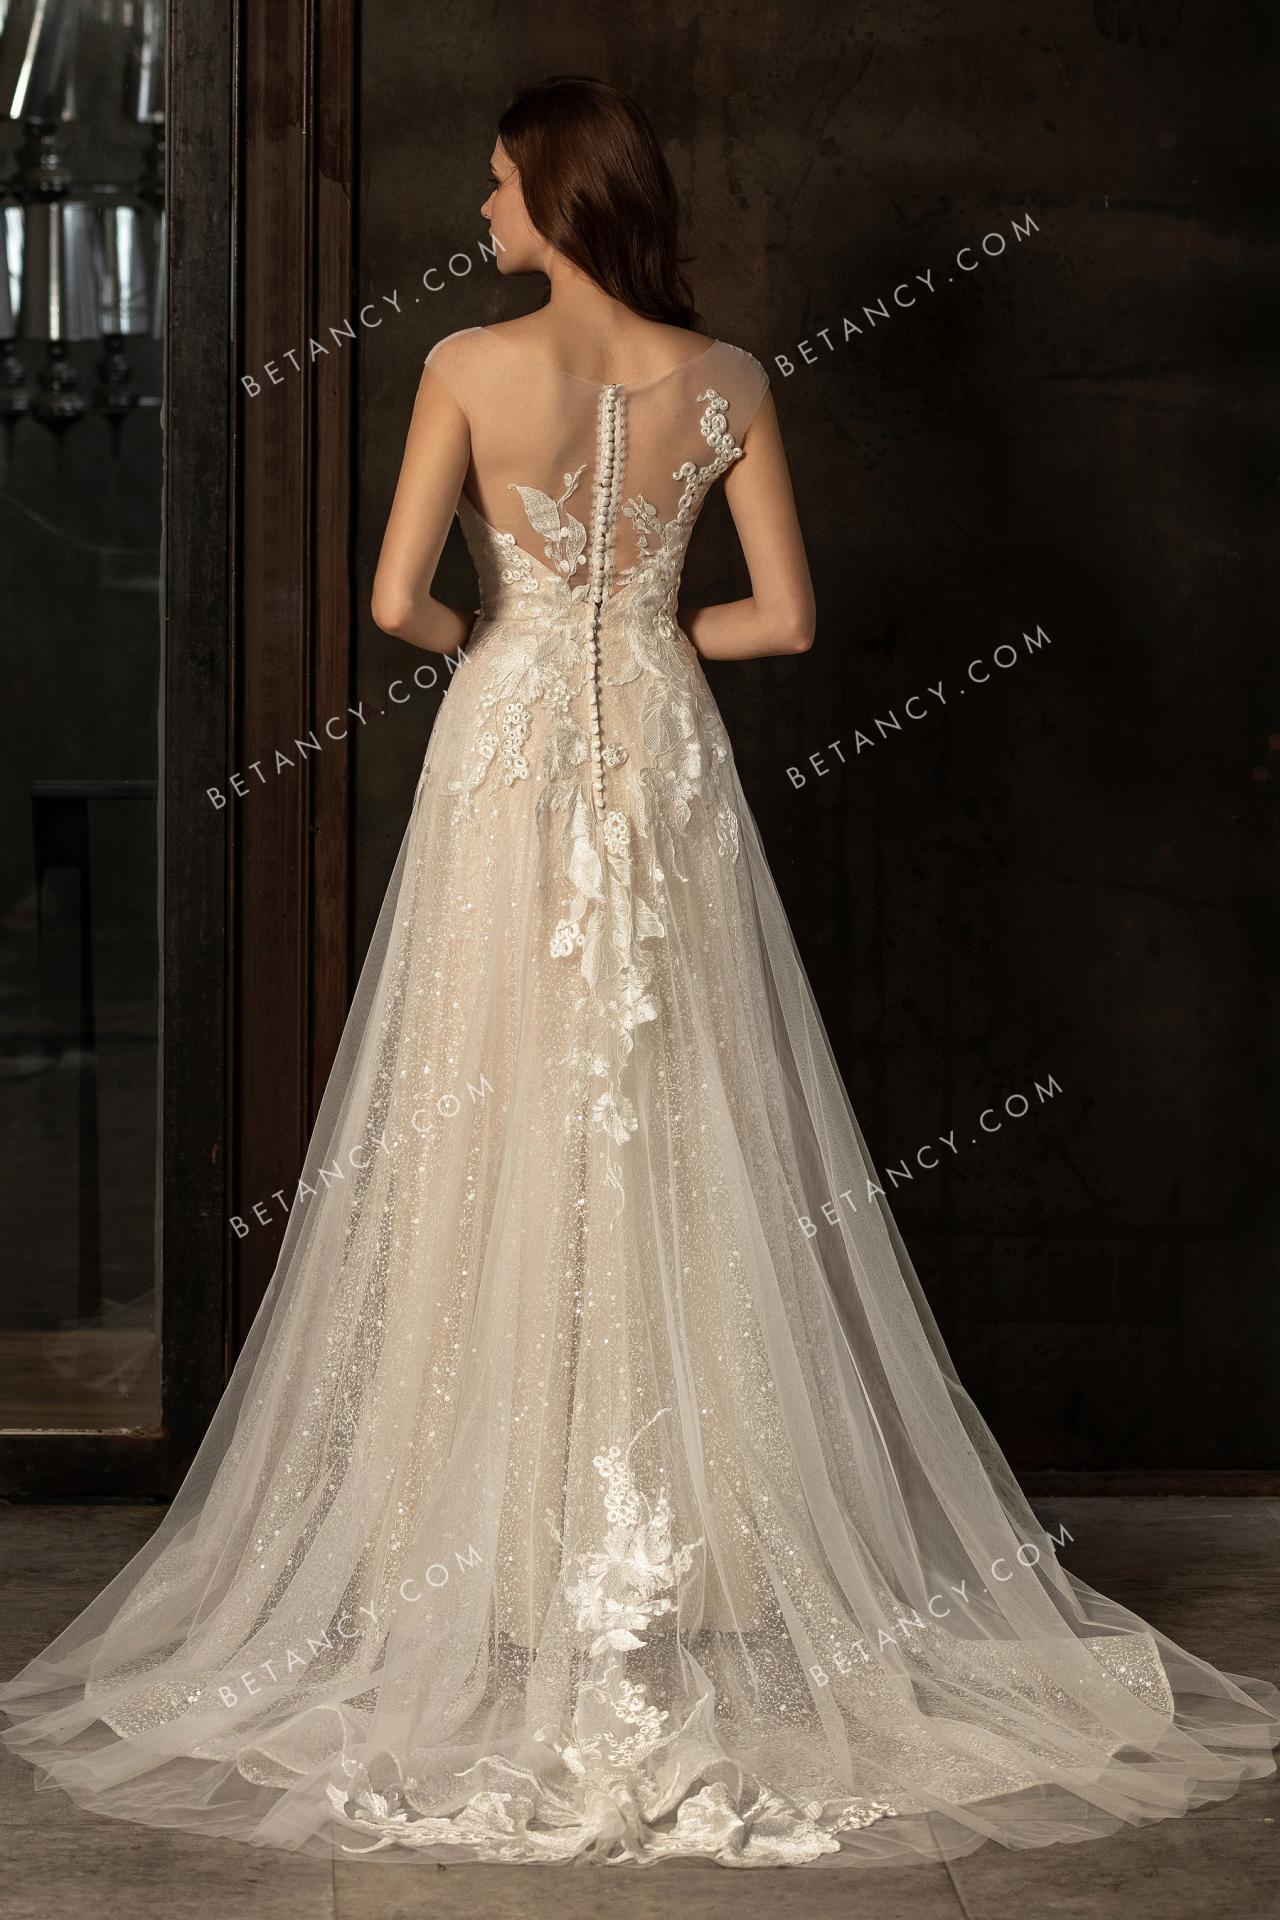 Sheer lace button back wedding gown 3